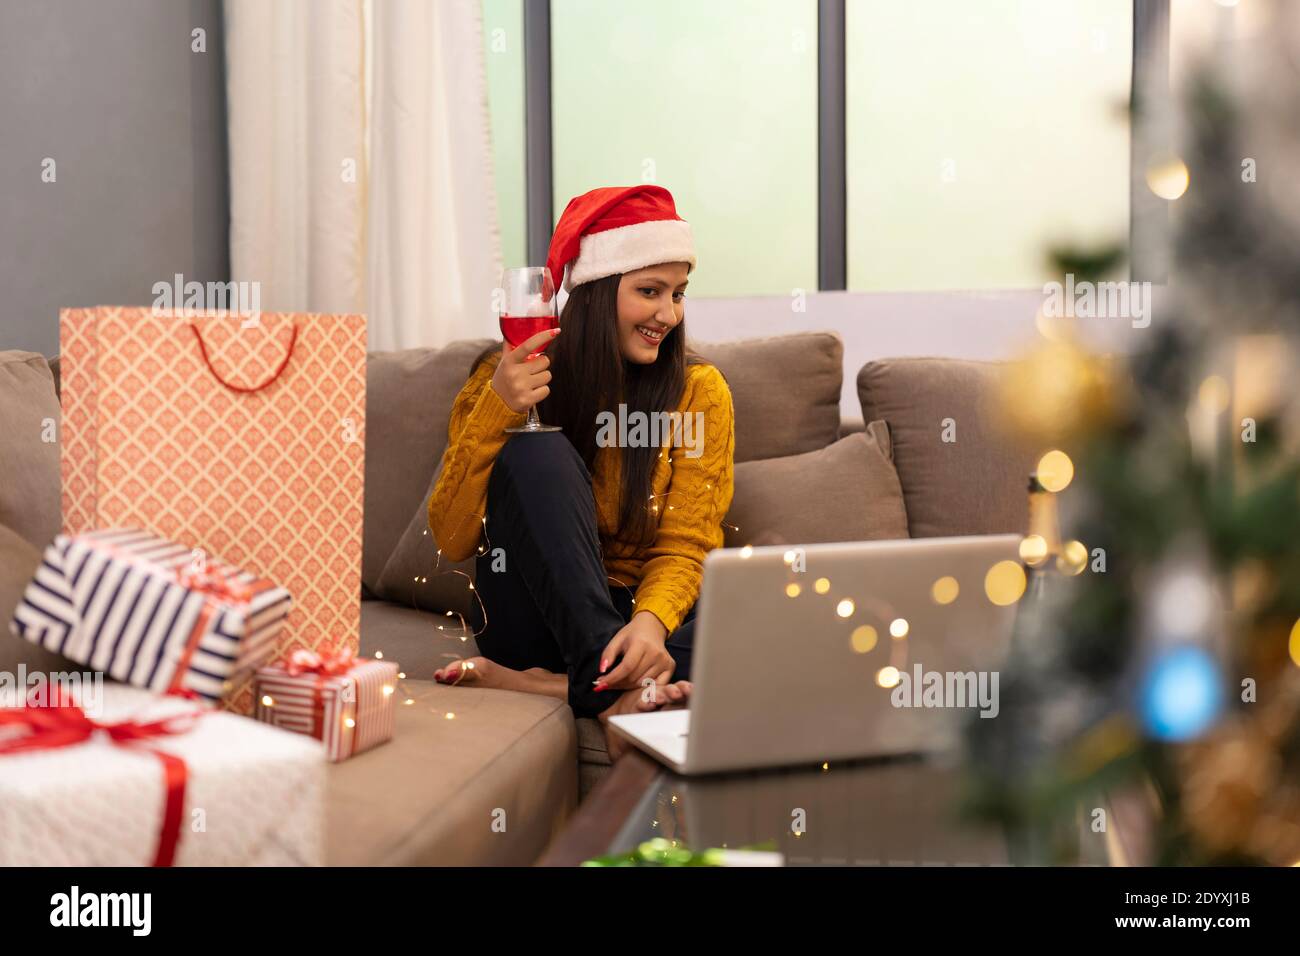 Happy Woman Making Video Call During Christmas Celebration holding wine glass Stock Photo